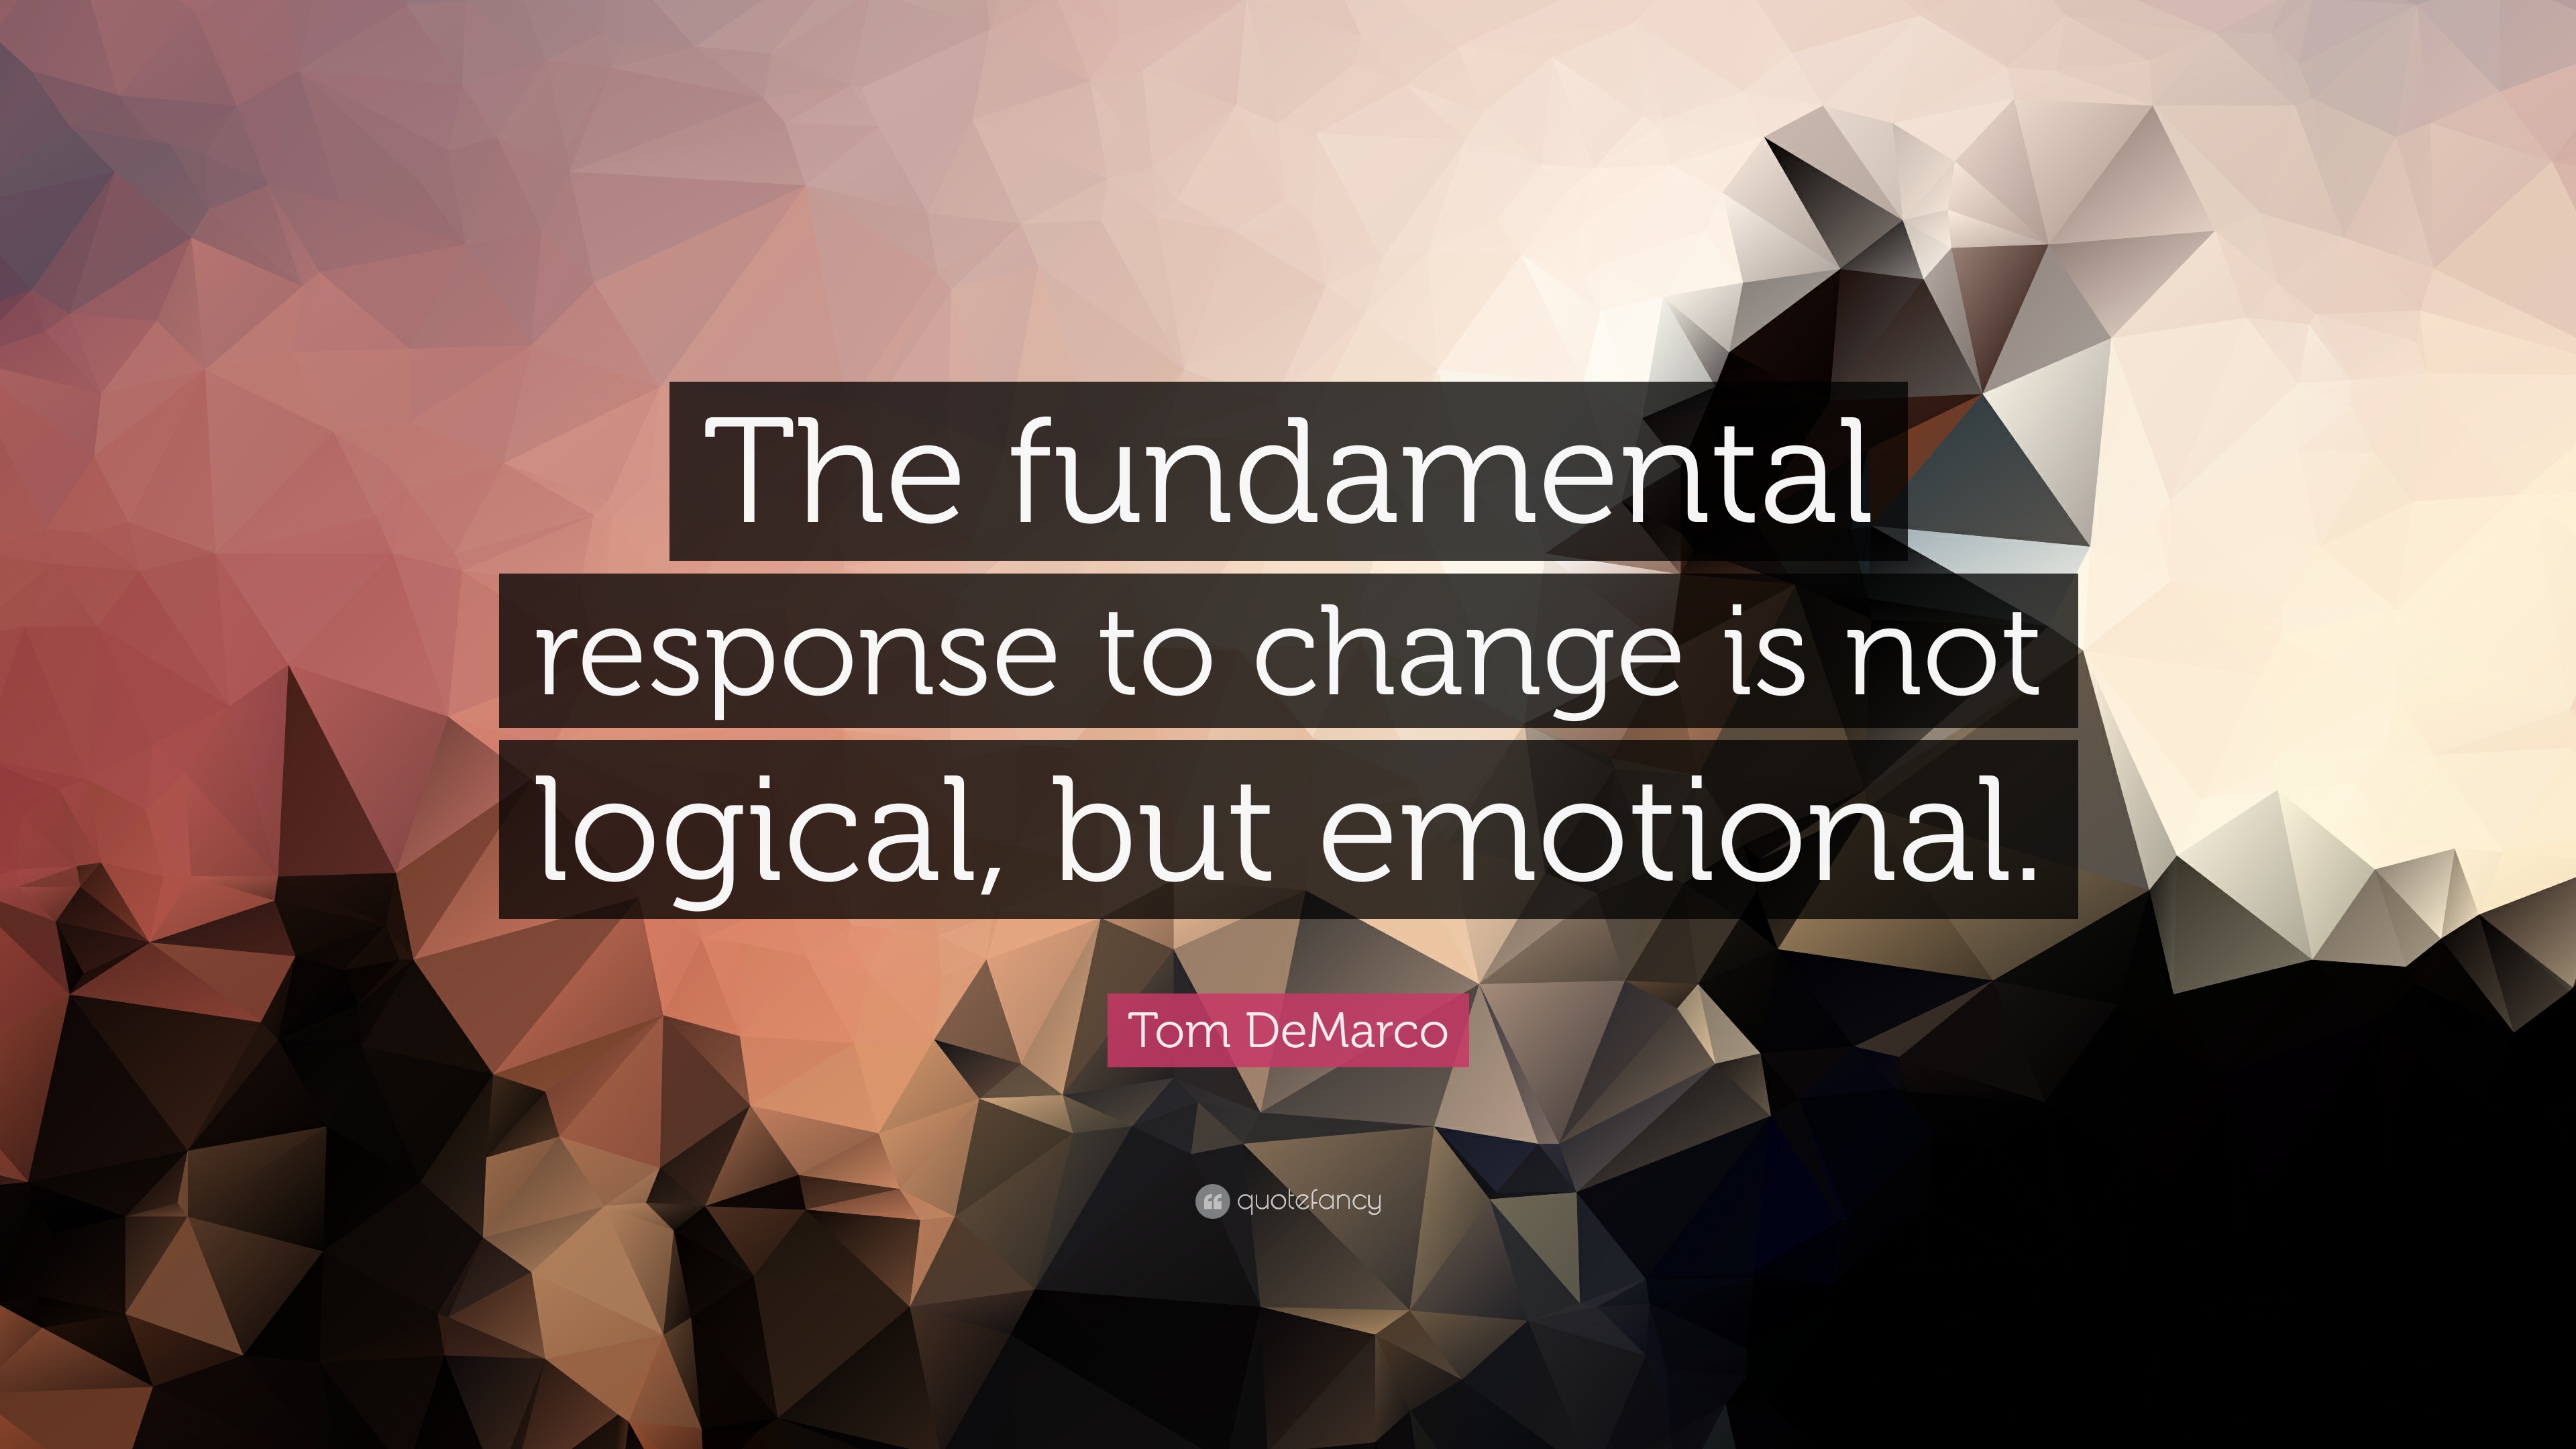 Tom DeMarco Quote: “The fundamental response to change is not logical